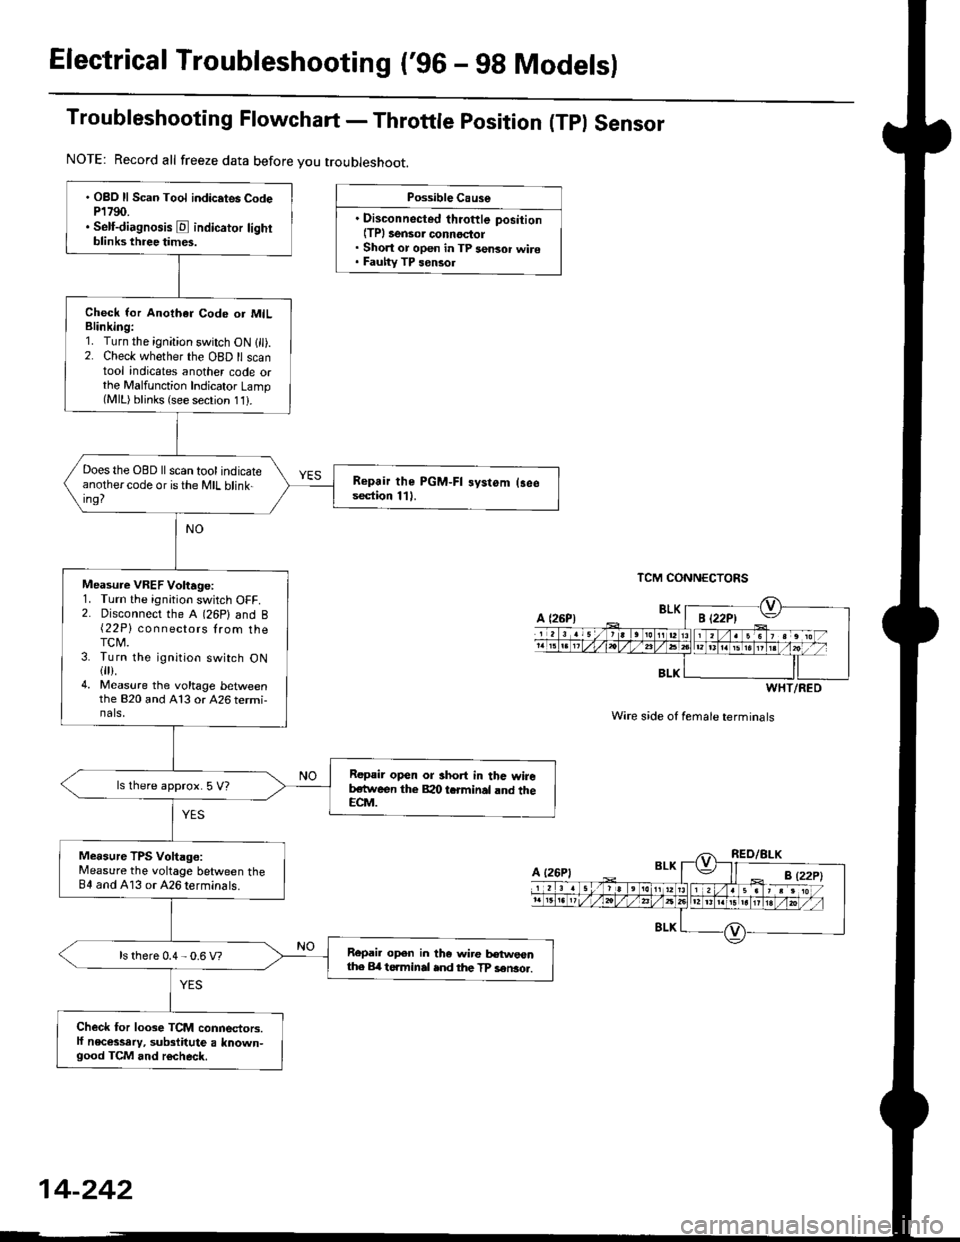 HONDA CIVIC 1999 6.G Owners Manual Electrical Troubleshooting (96 - 98 Modelsl
Troubleshooting Flowchart - Throttle position (Tpl Sensor
Possible Cause
. Disconnected throftle position(TPl 3ensor connoctol. Short or open in TP sensor 